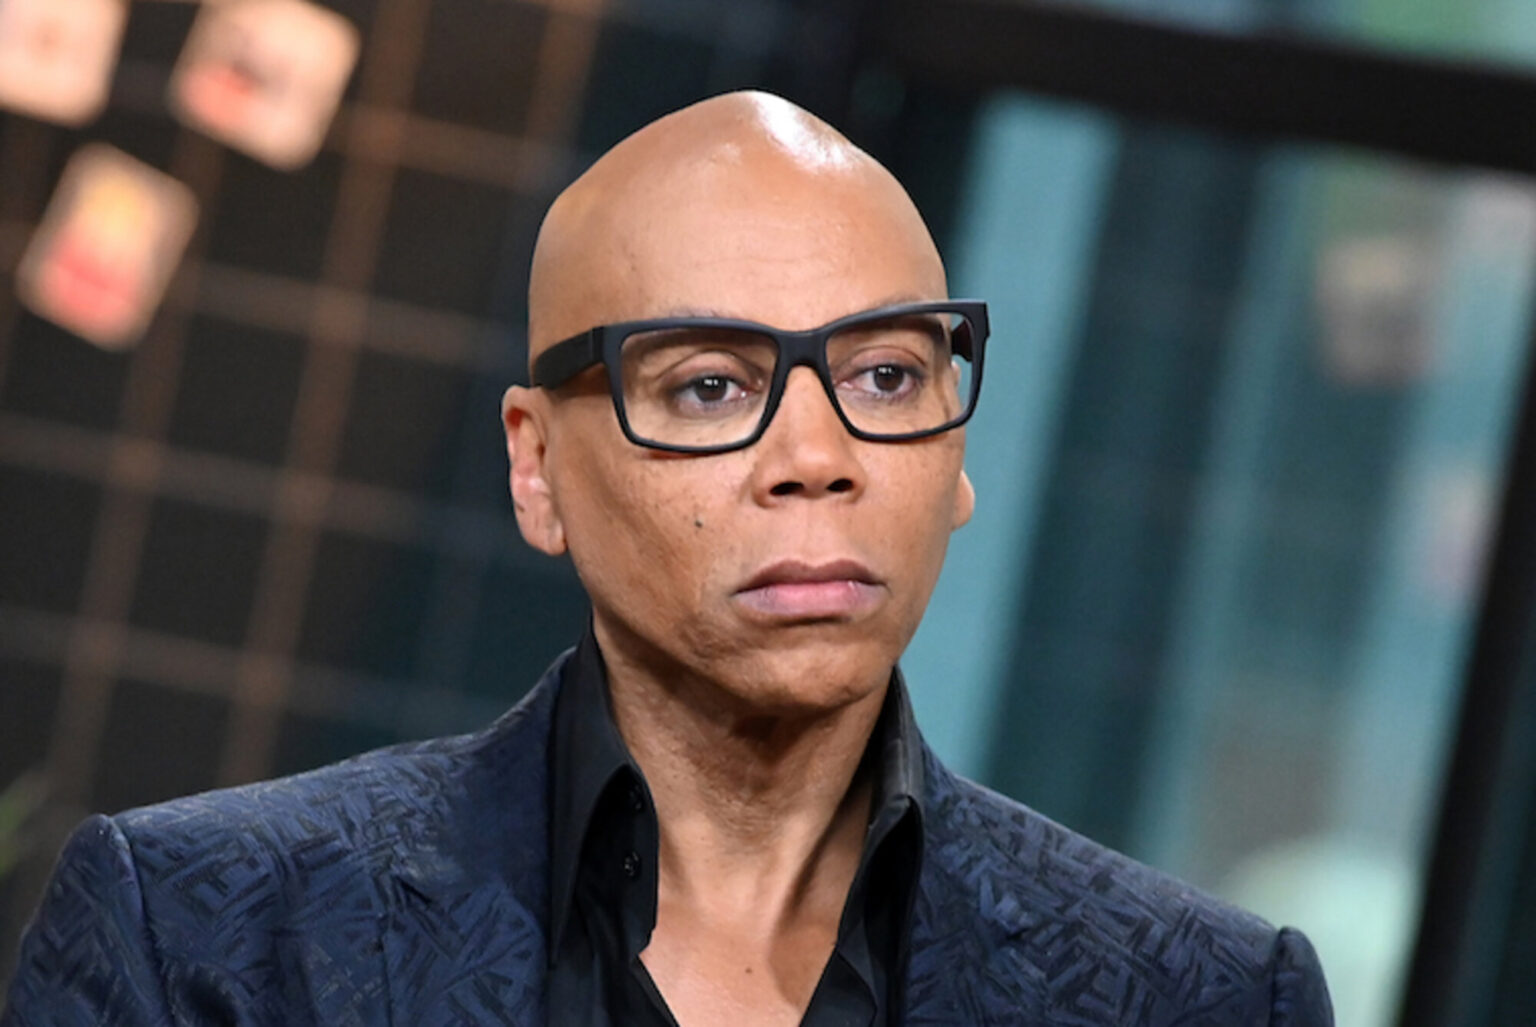 It turns out that RuPaul is really not taking any breaks, as he will also be in an upcoming animated Netflix Original series. Which role will he play?